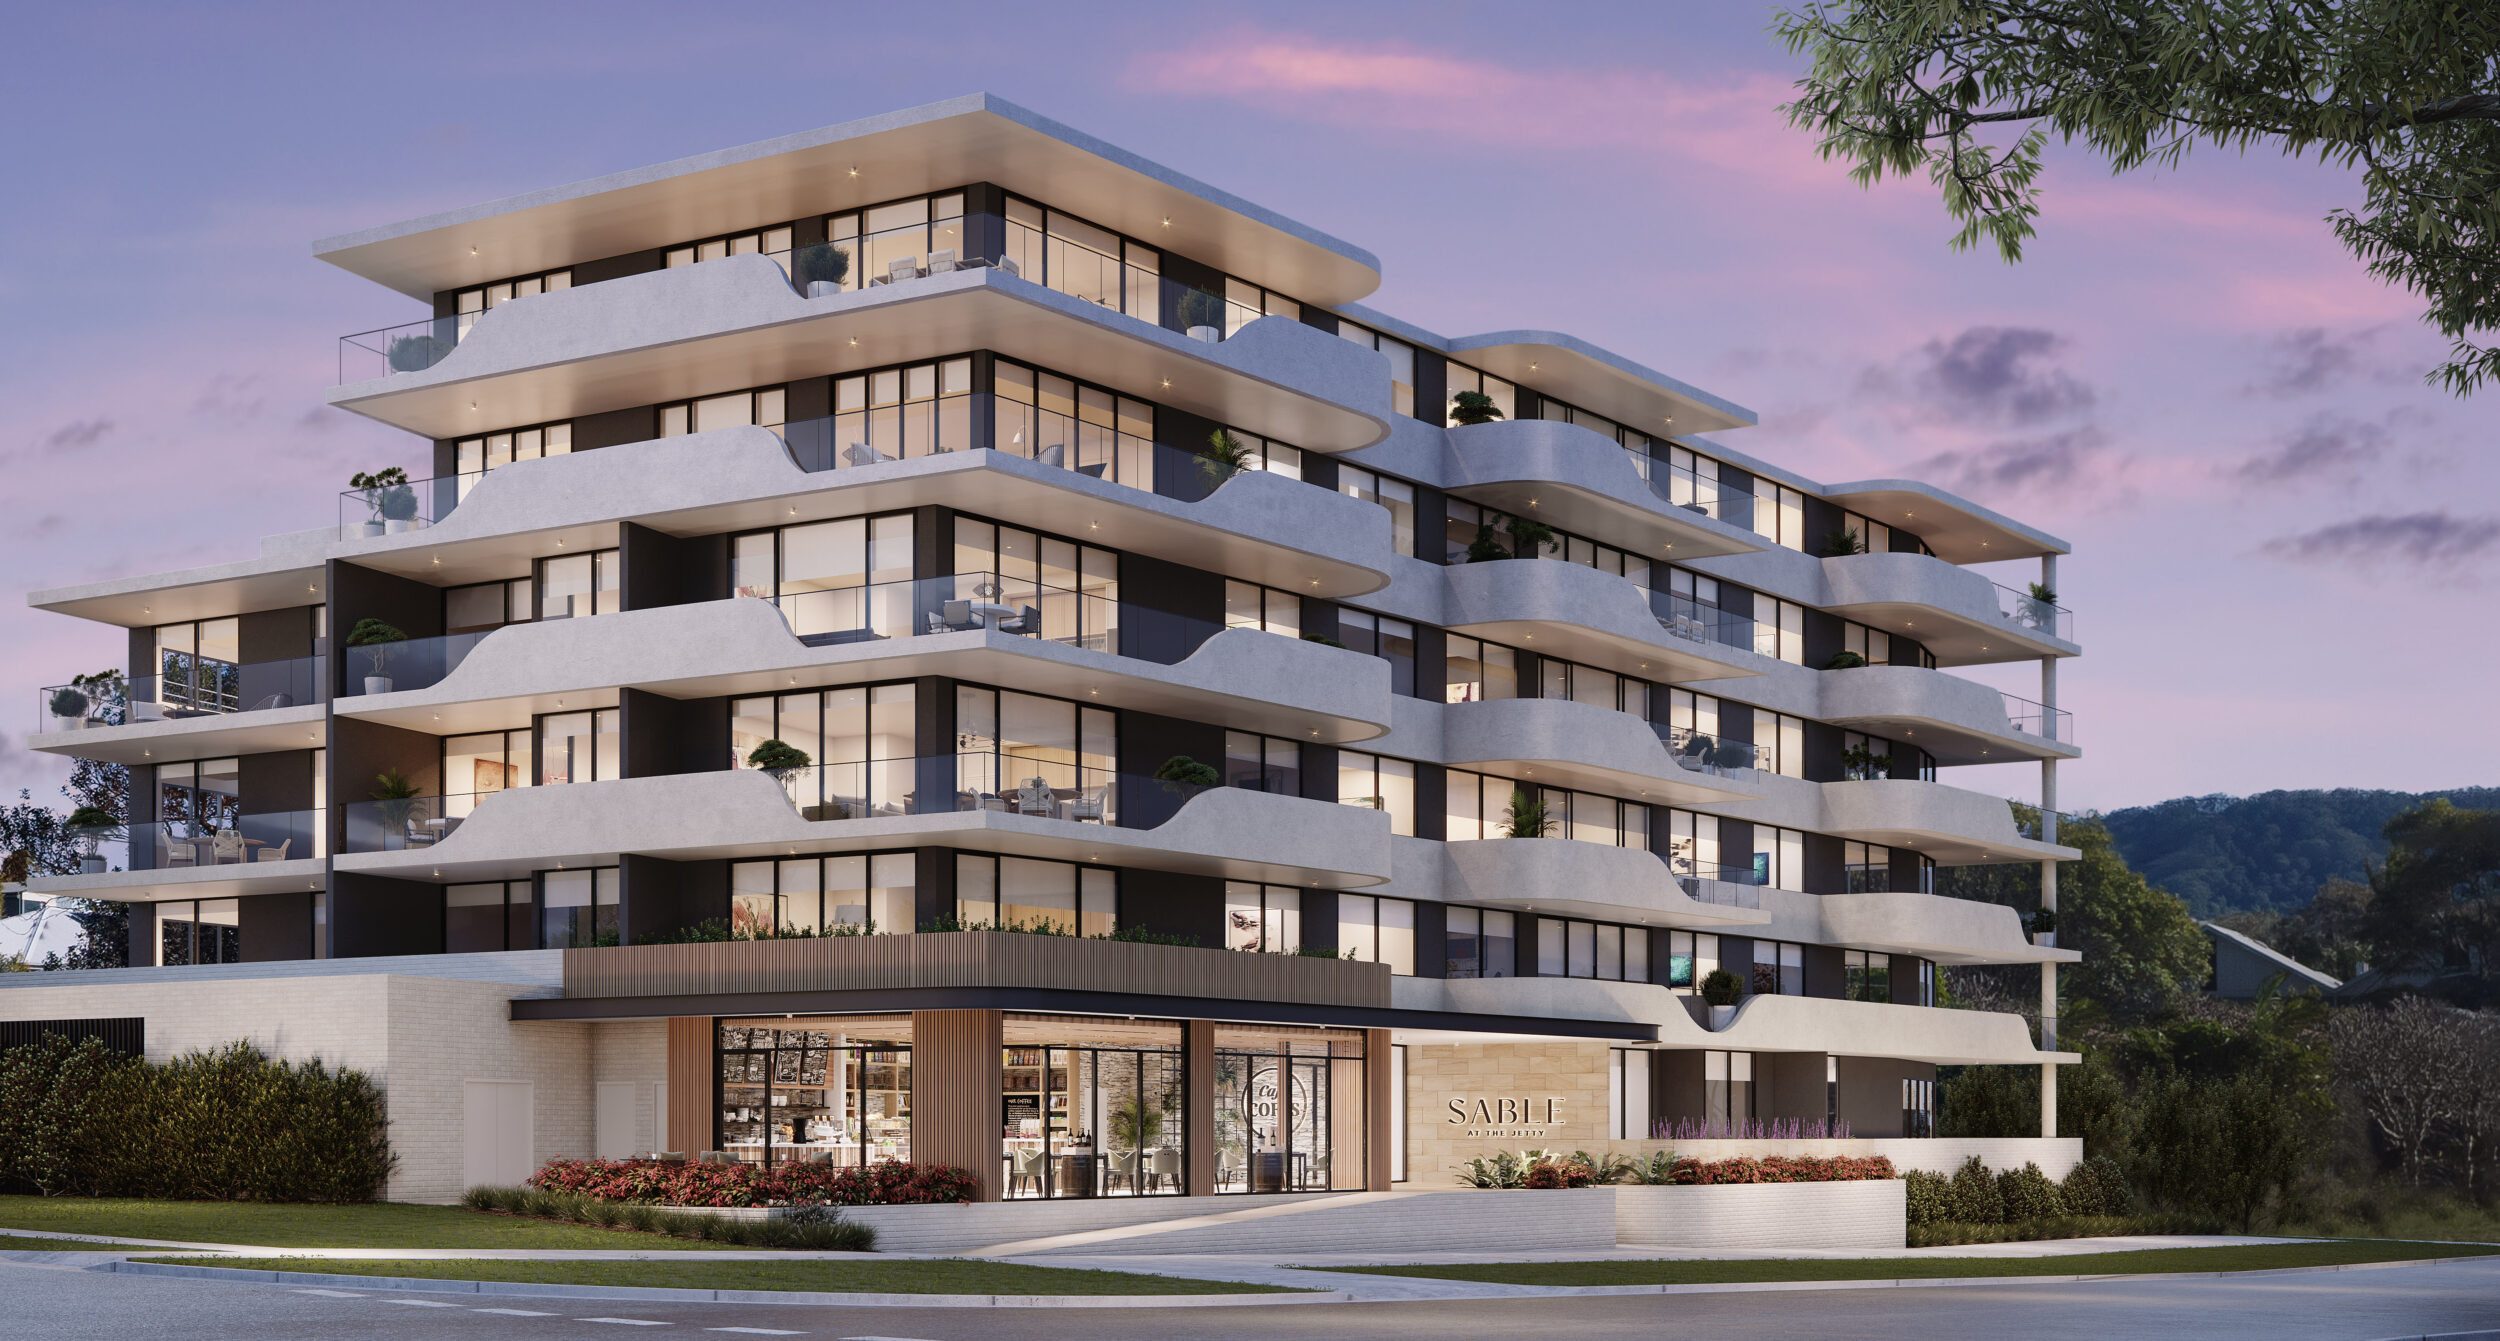 Award-winning builder set to deliver Third.i’s debut Coffs Harbour project